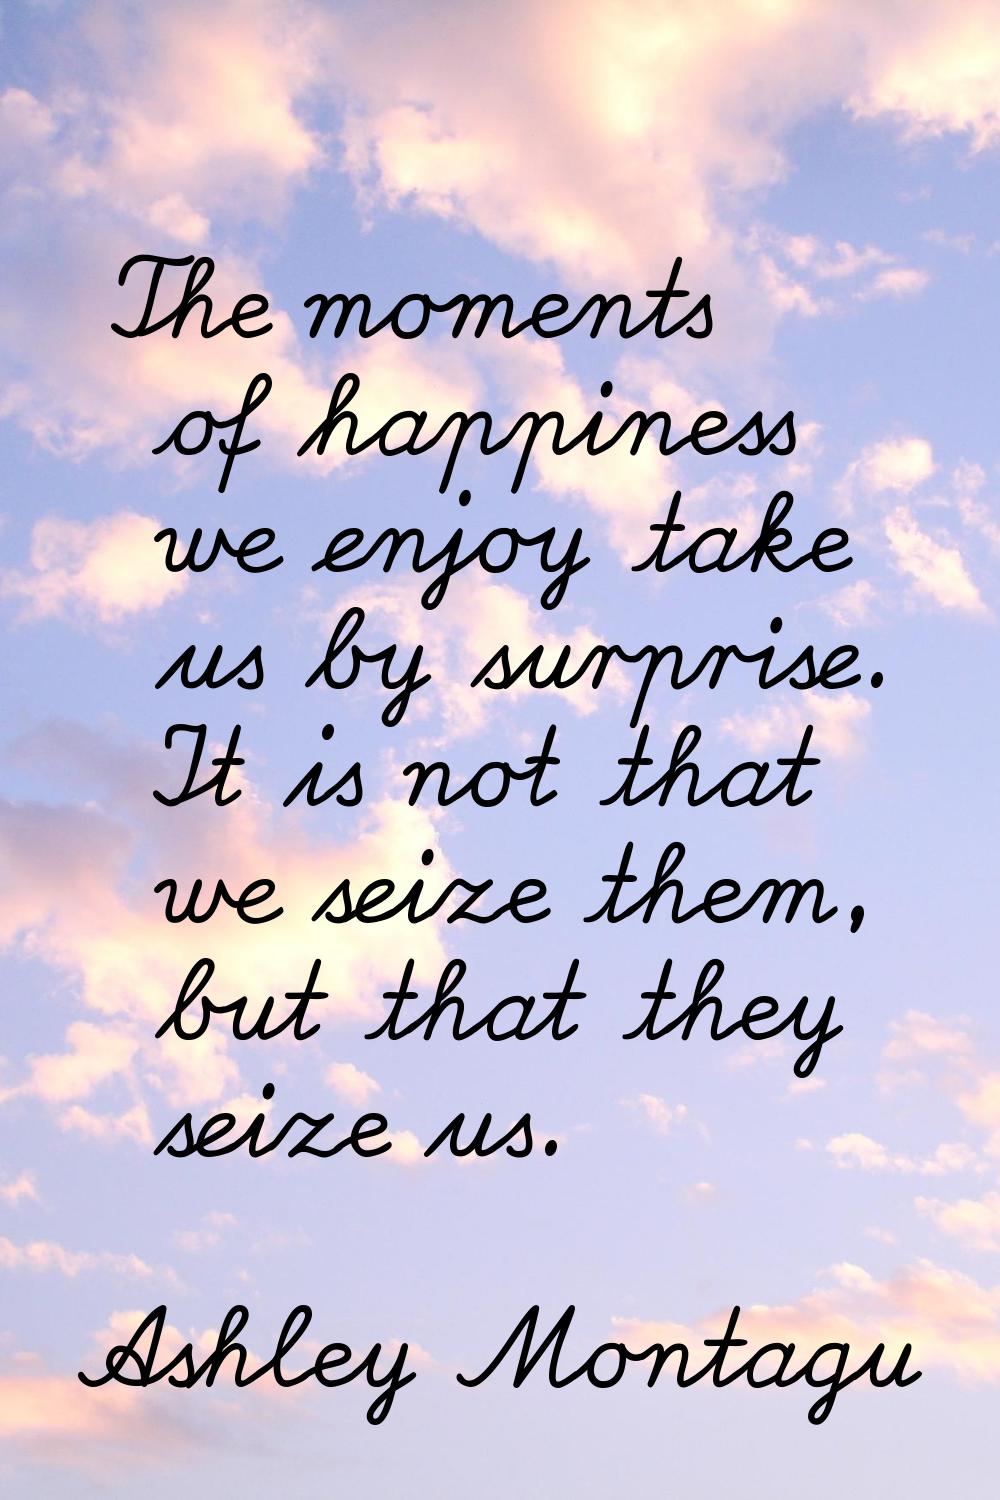 The moments of happiness we enjoy take us by surprise. It is not that we seize them, but that they 